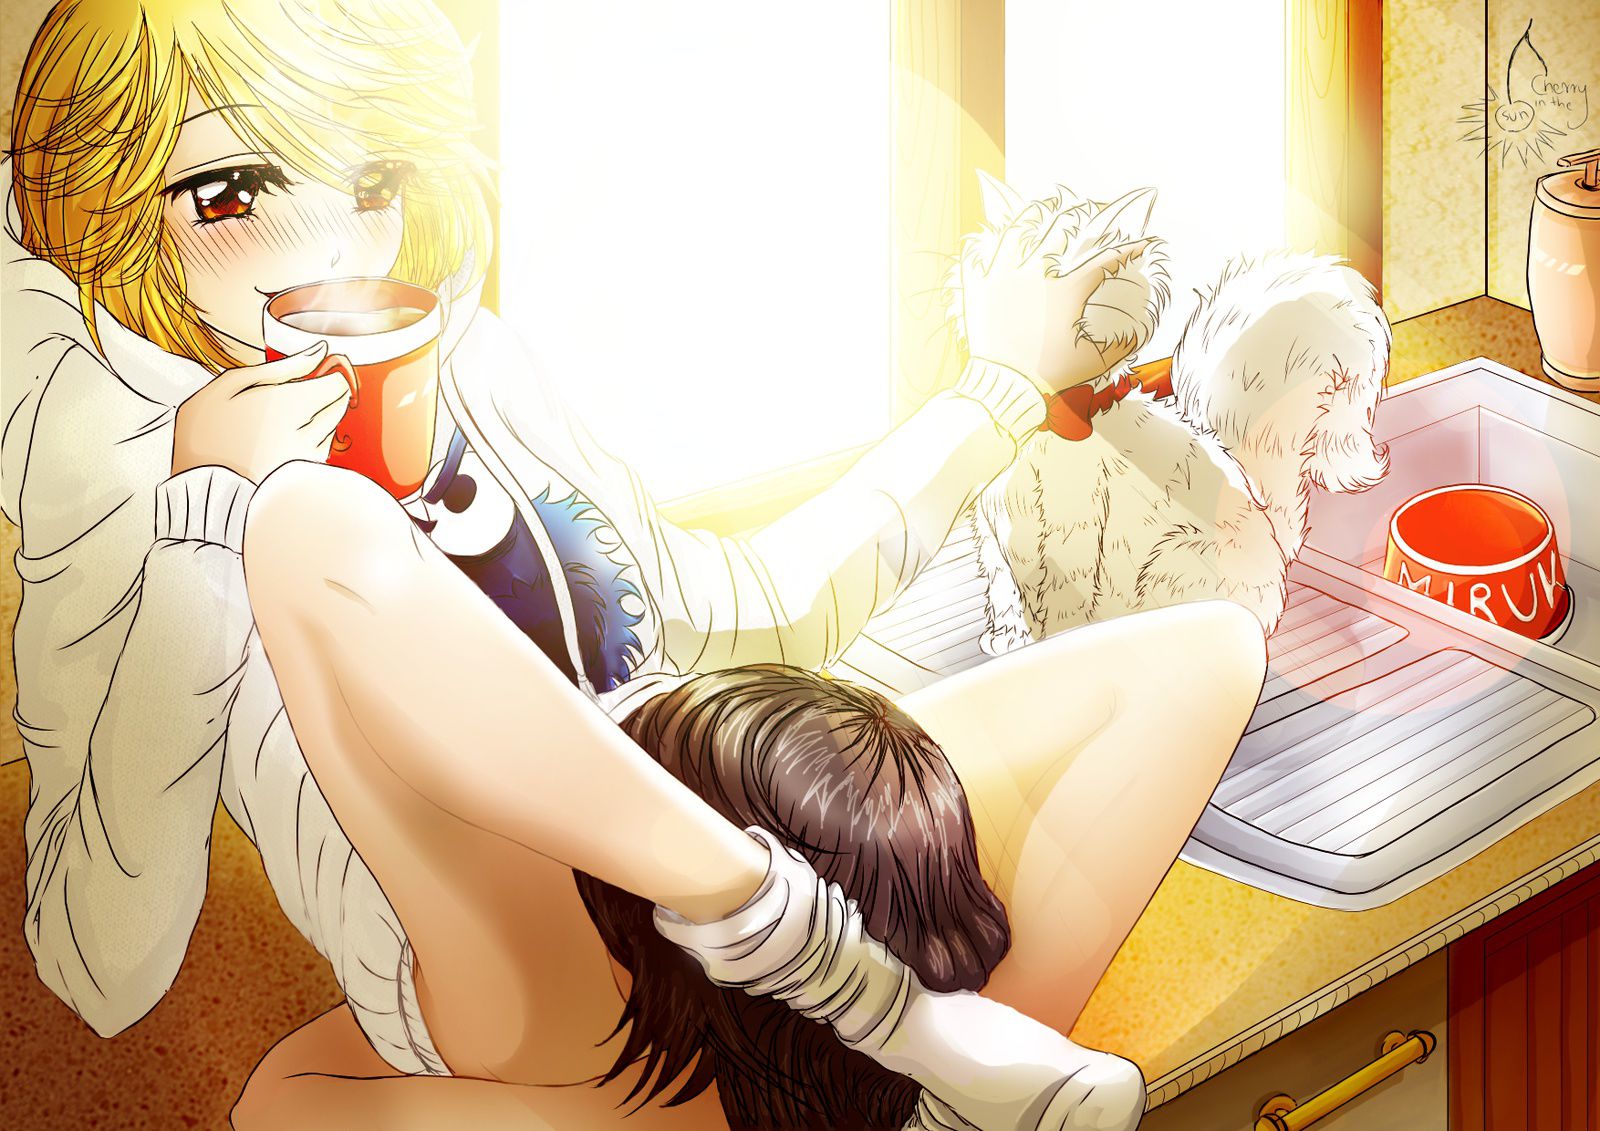 【Erotic Anime Summary】 Erotic image of girls playing lesbi kunni with each other 【Secondary erotica】 17